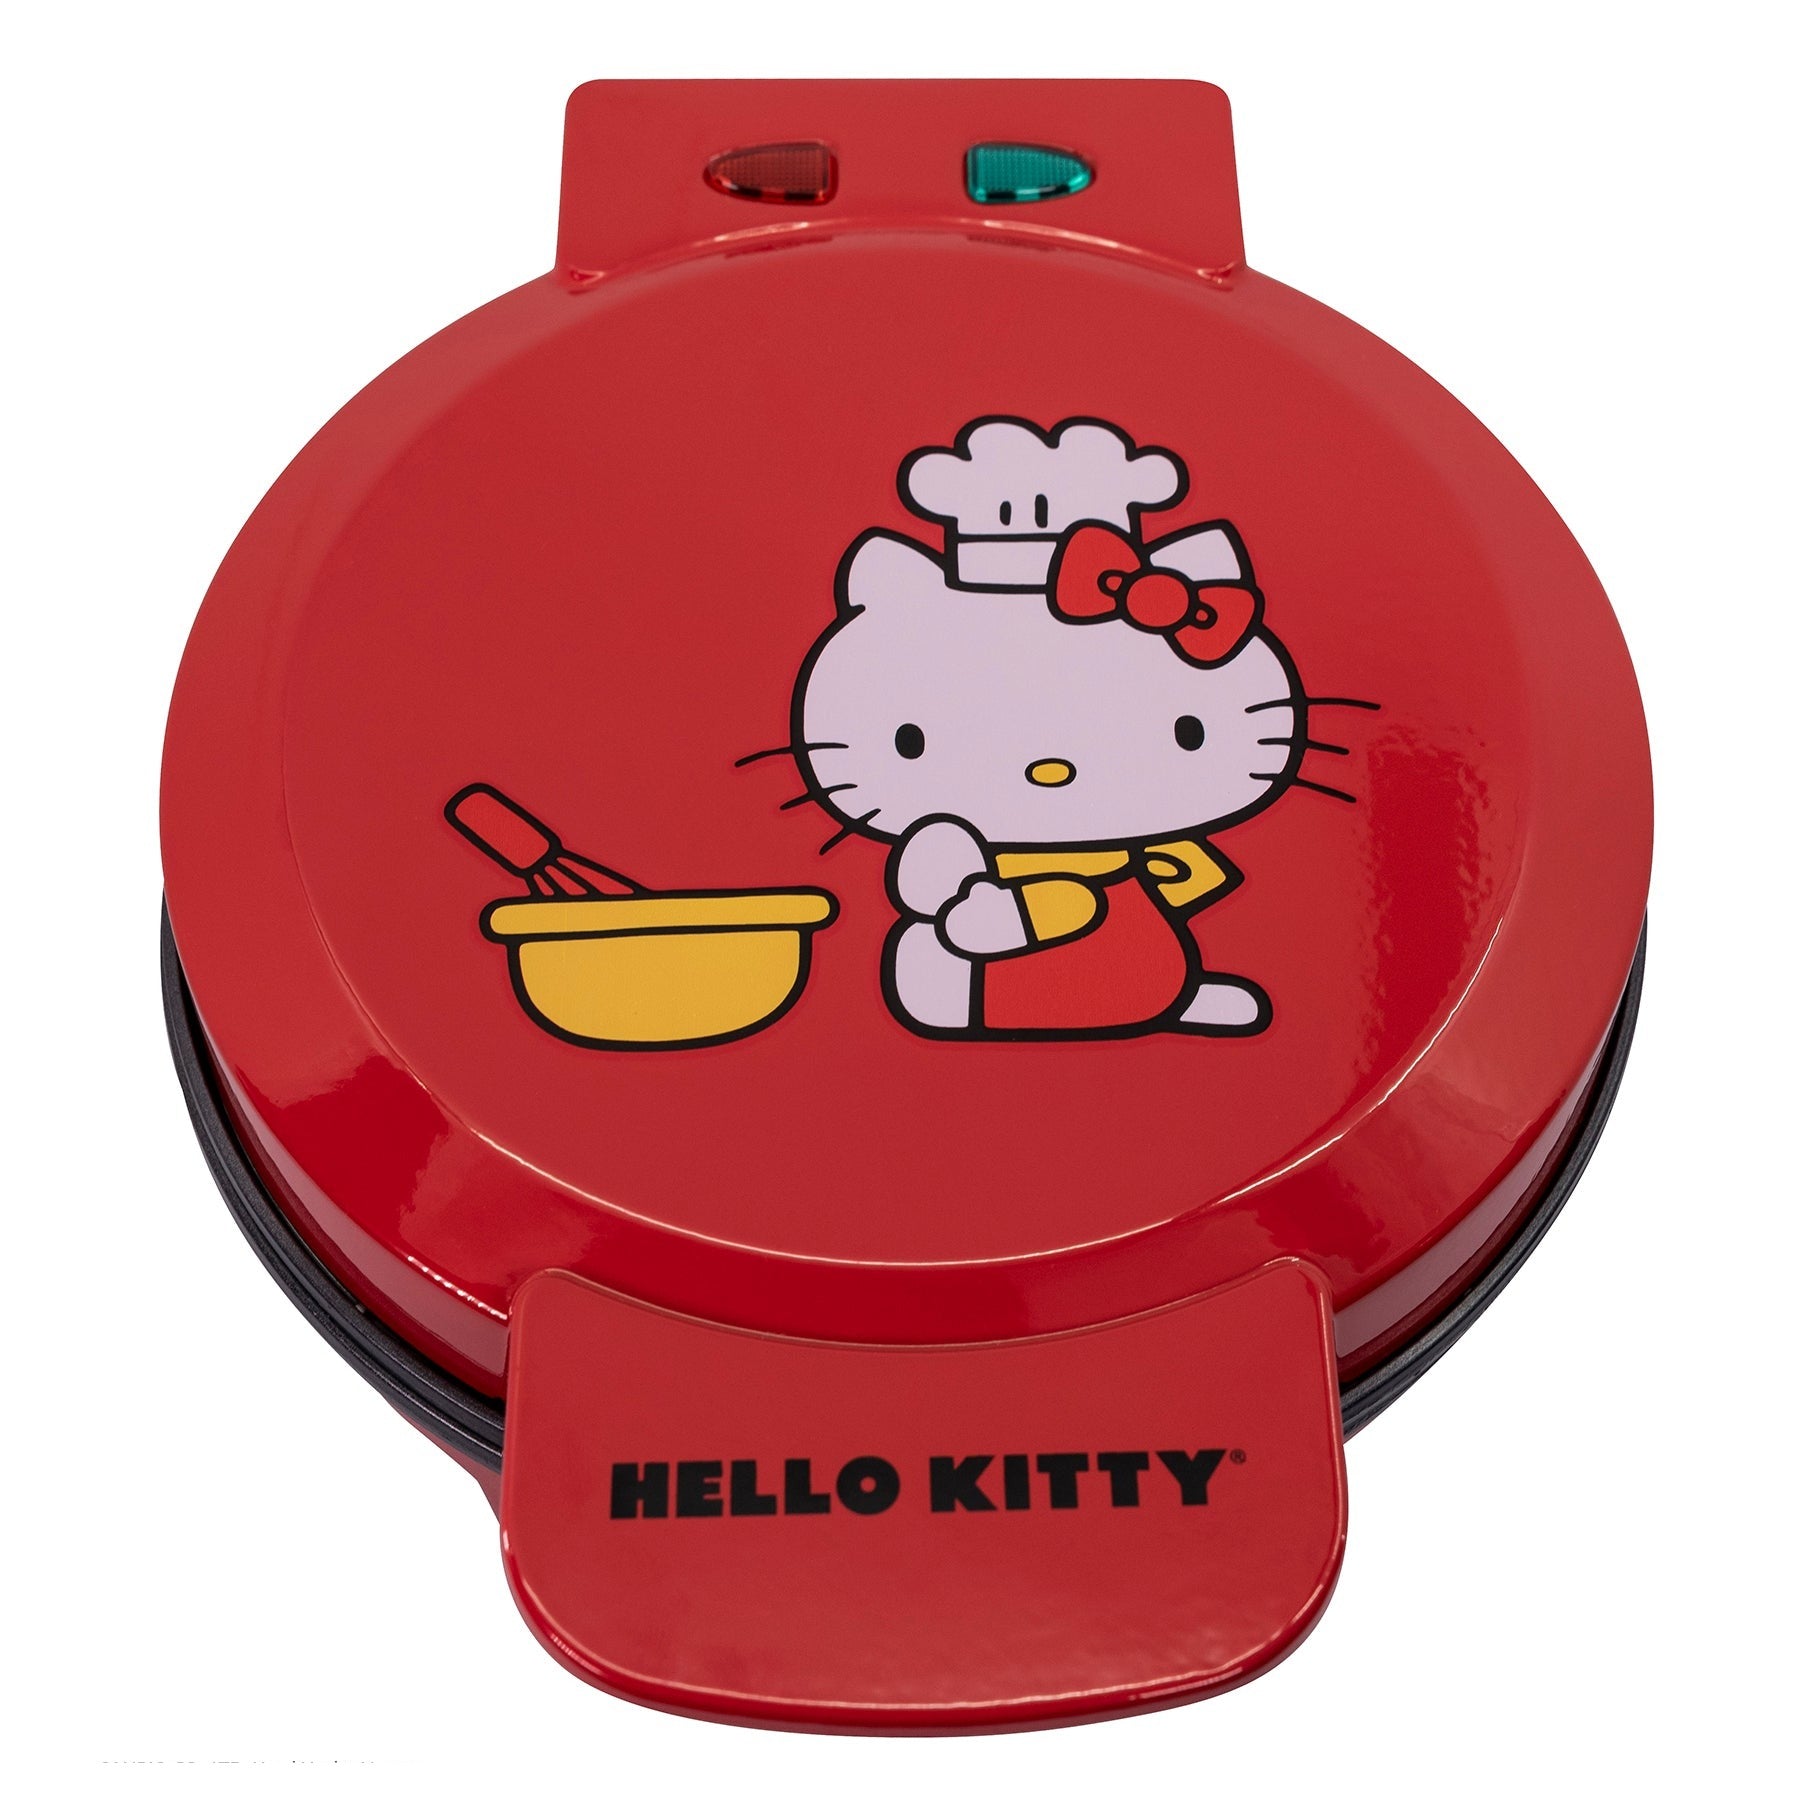 Sanrio Hello Kitty 2-in-1 Electric Whisk and Food Grinder USB Rechargeable  Handheld 3-speed 304 Stainless Steel Gifts Mixer Butter / Tarts / Cakes /  Cookies Inspired by You.